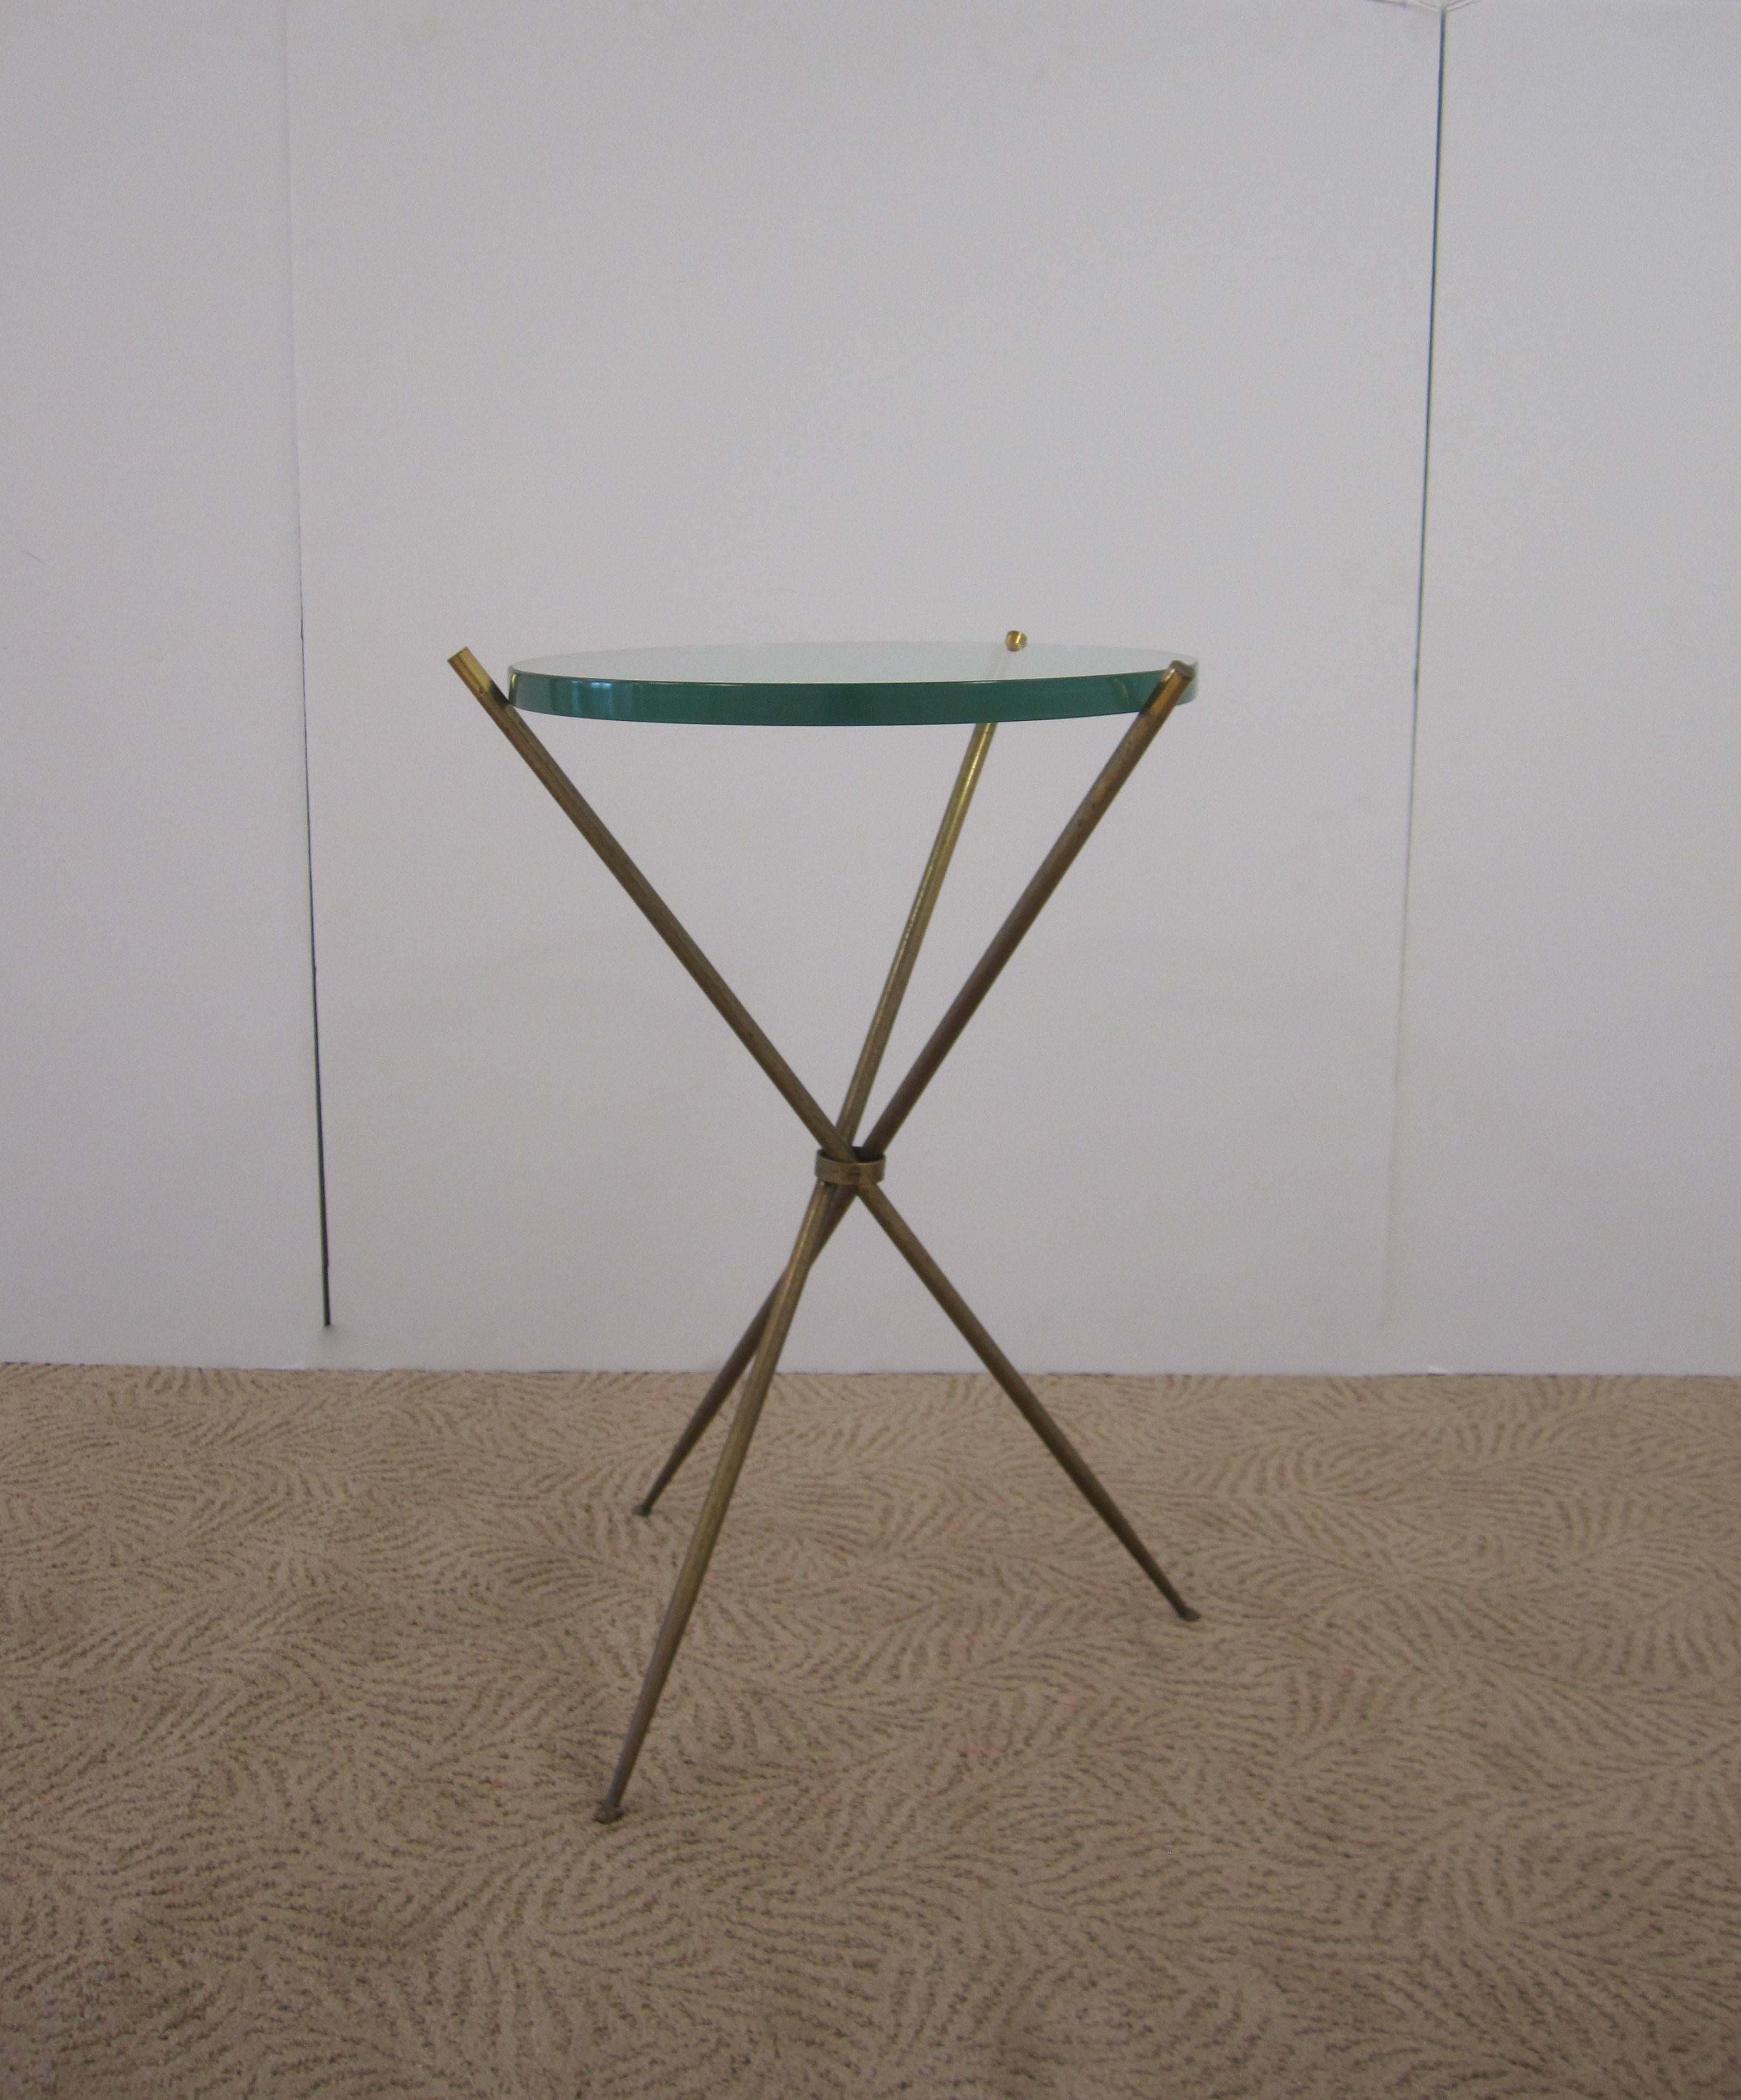 Vintage Modern Italian Brass and Glass Tripod Side Table after Gio Ponti, Italy 1